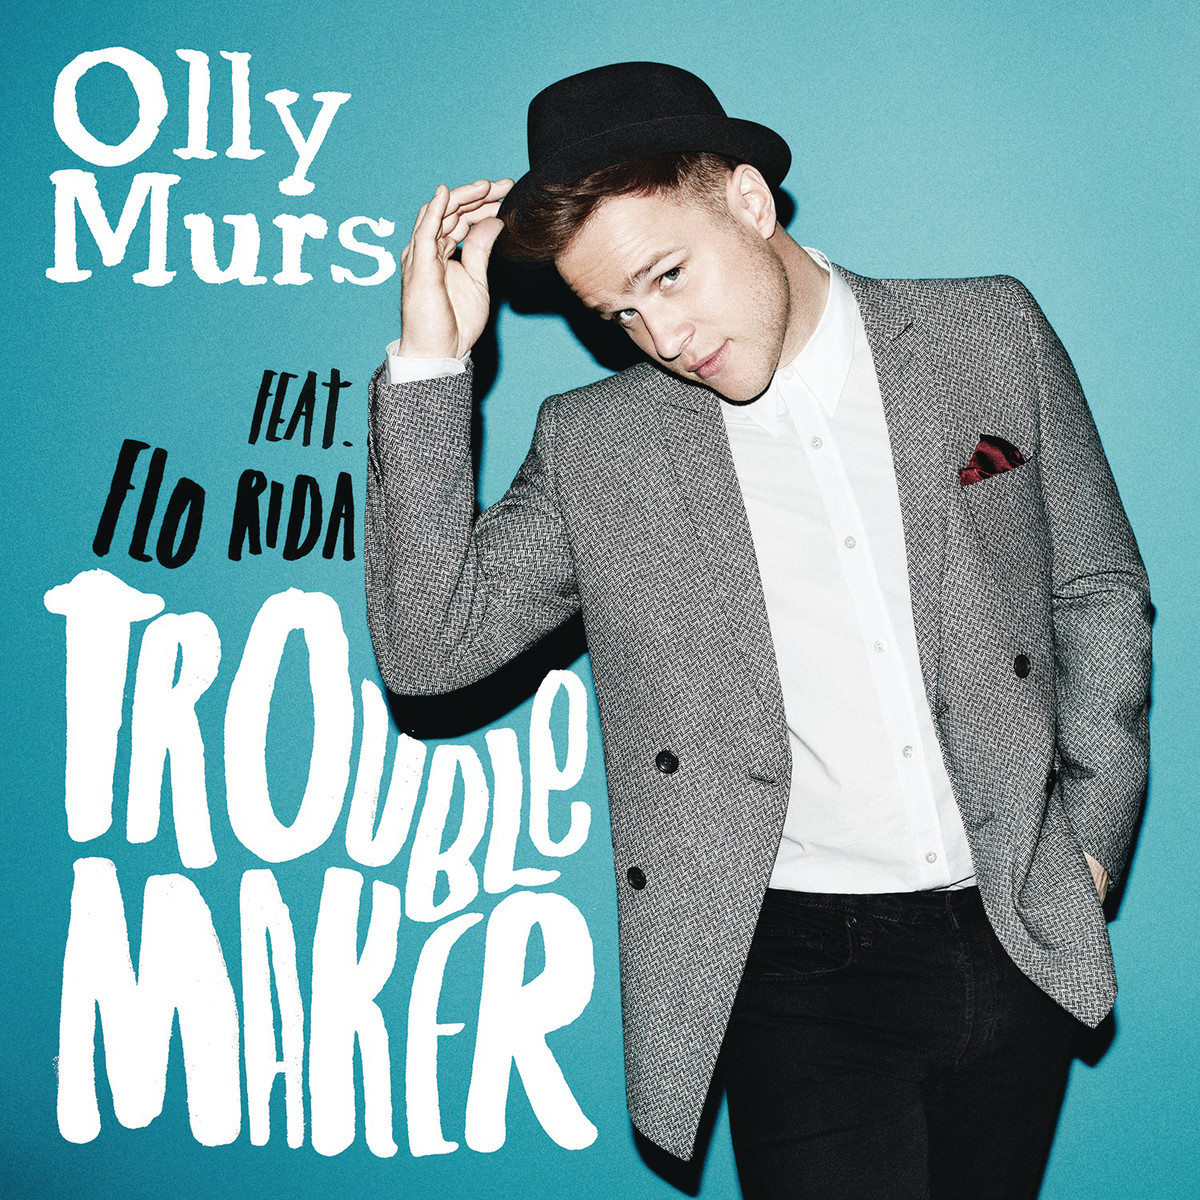 Troublemaker(Olly Murs等演唱歌曲)